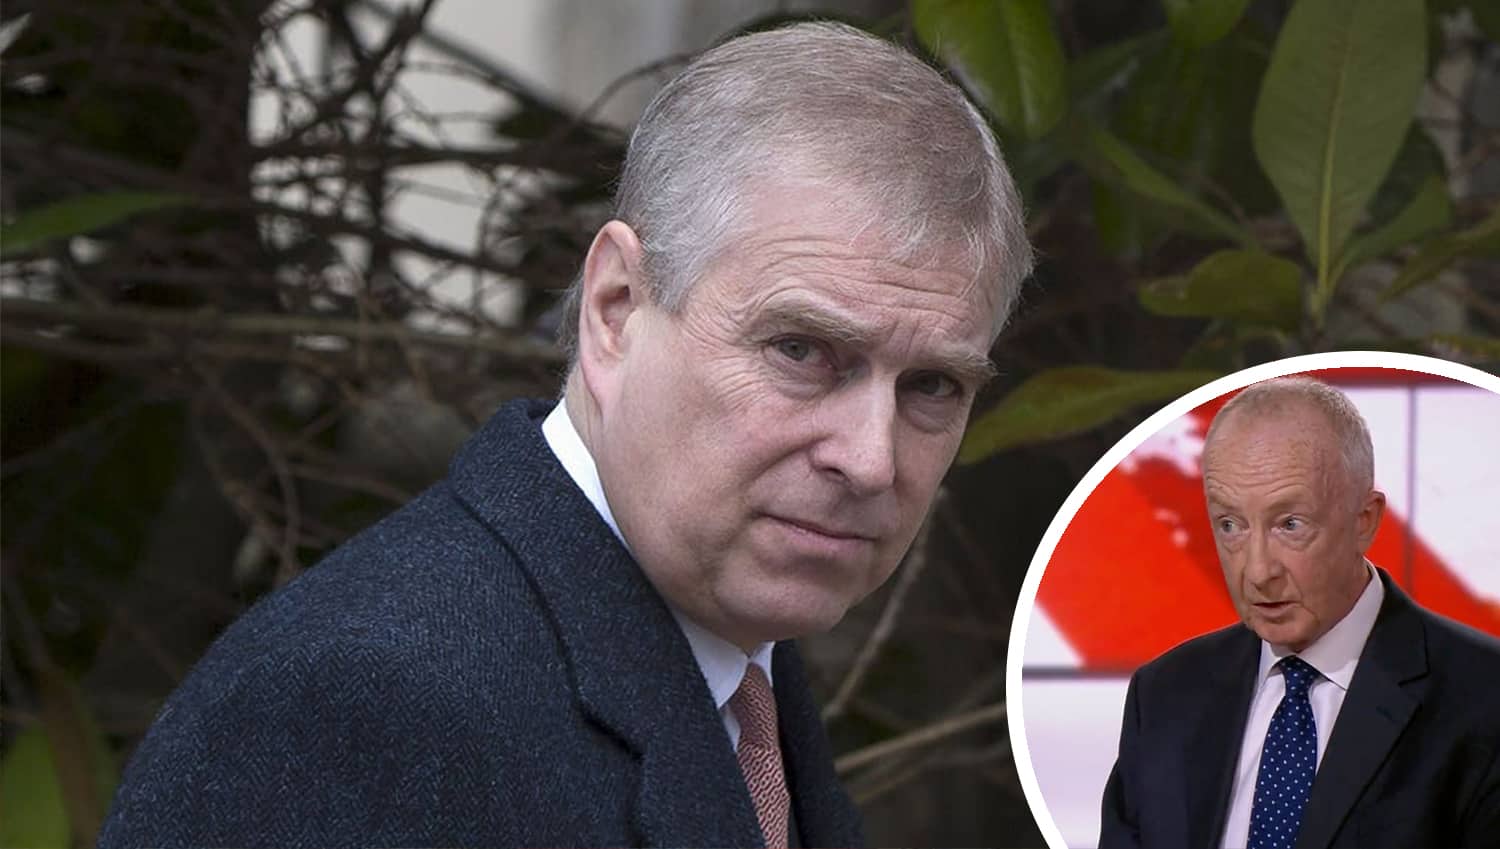 BBC royal correspondent sparks outrage after he maps out Prince Andrew’s route back to public life